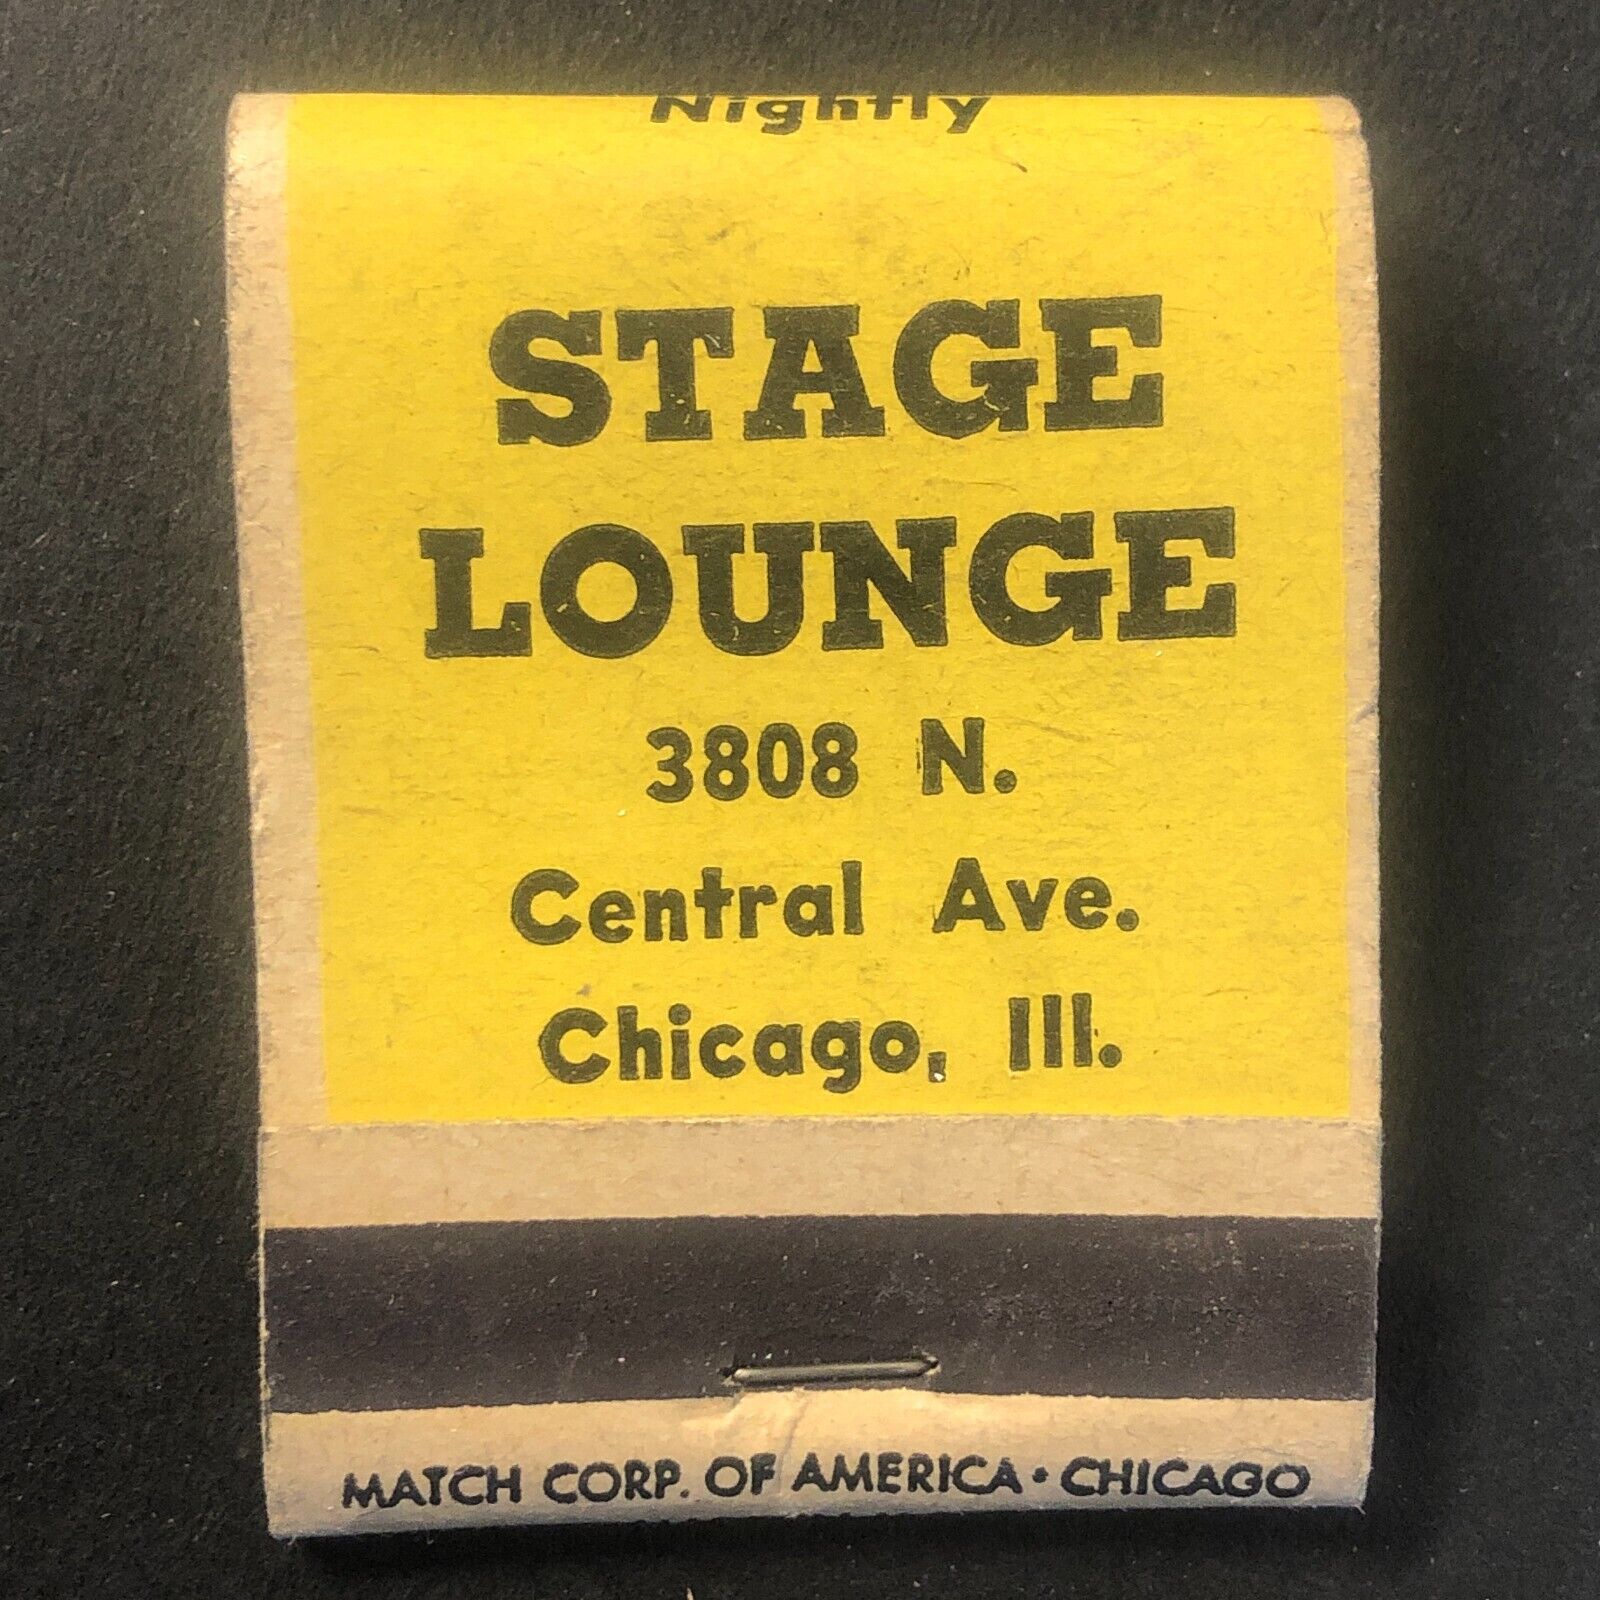 Stage Lounge Central Ave Chicago Full Matchbook c1940's-50's Scarce